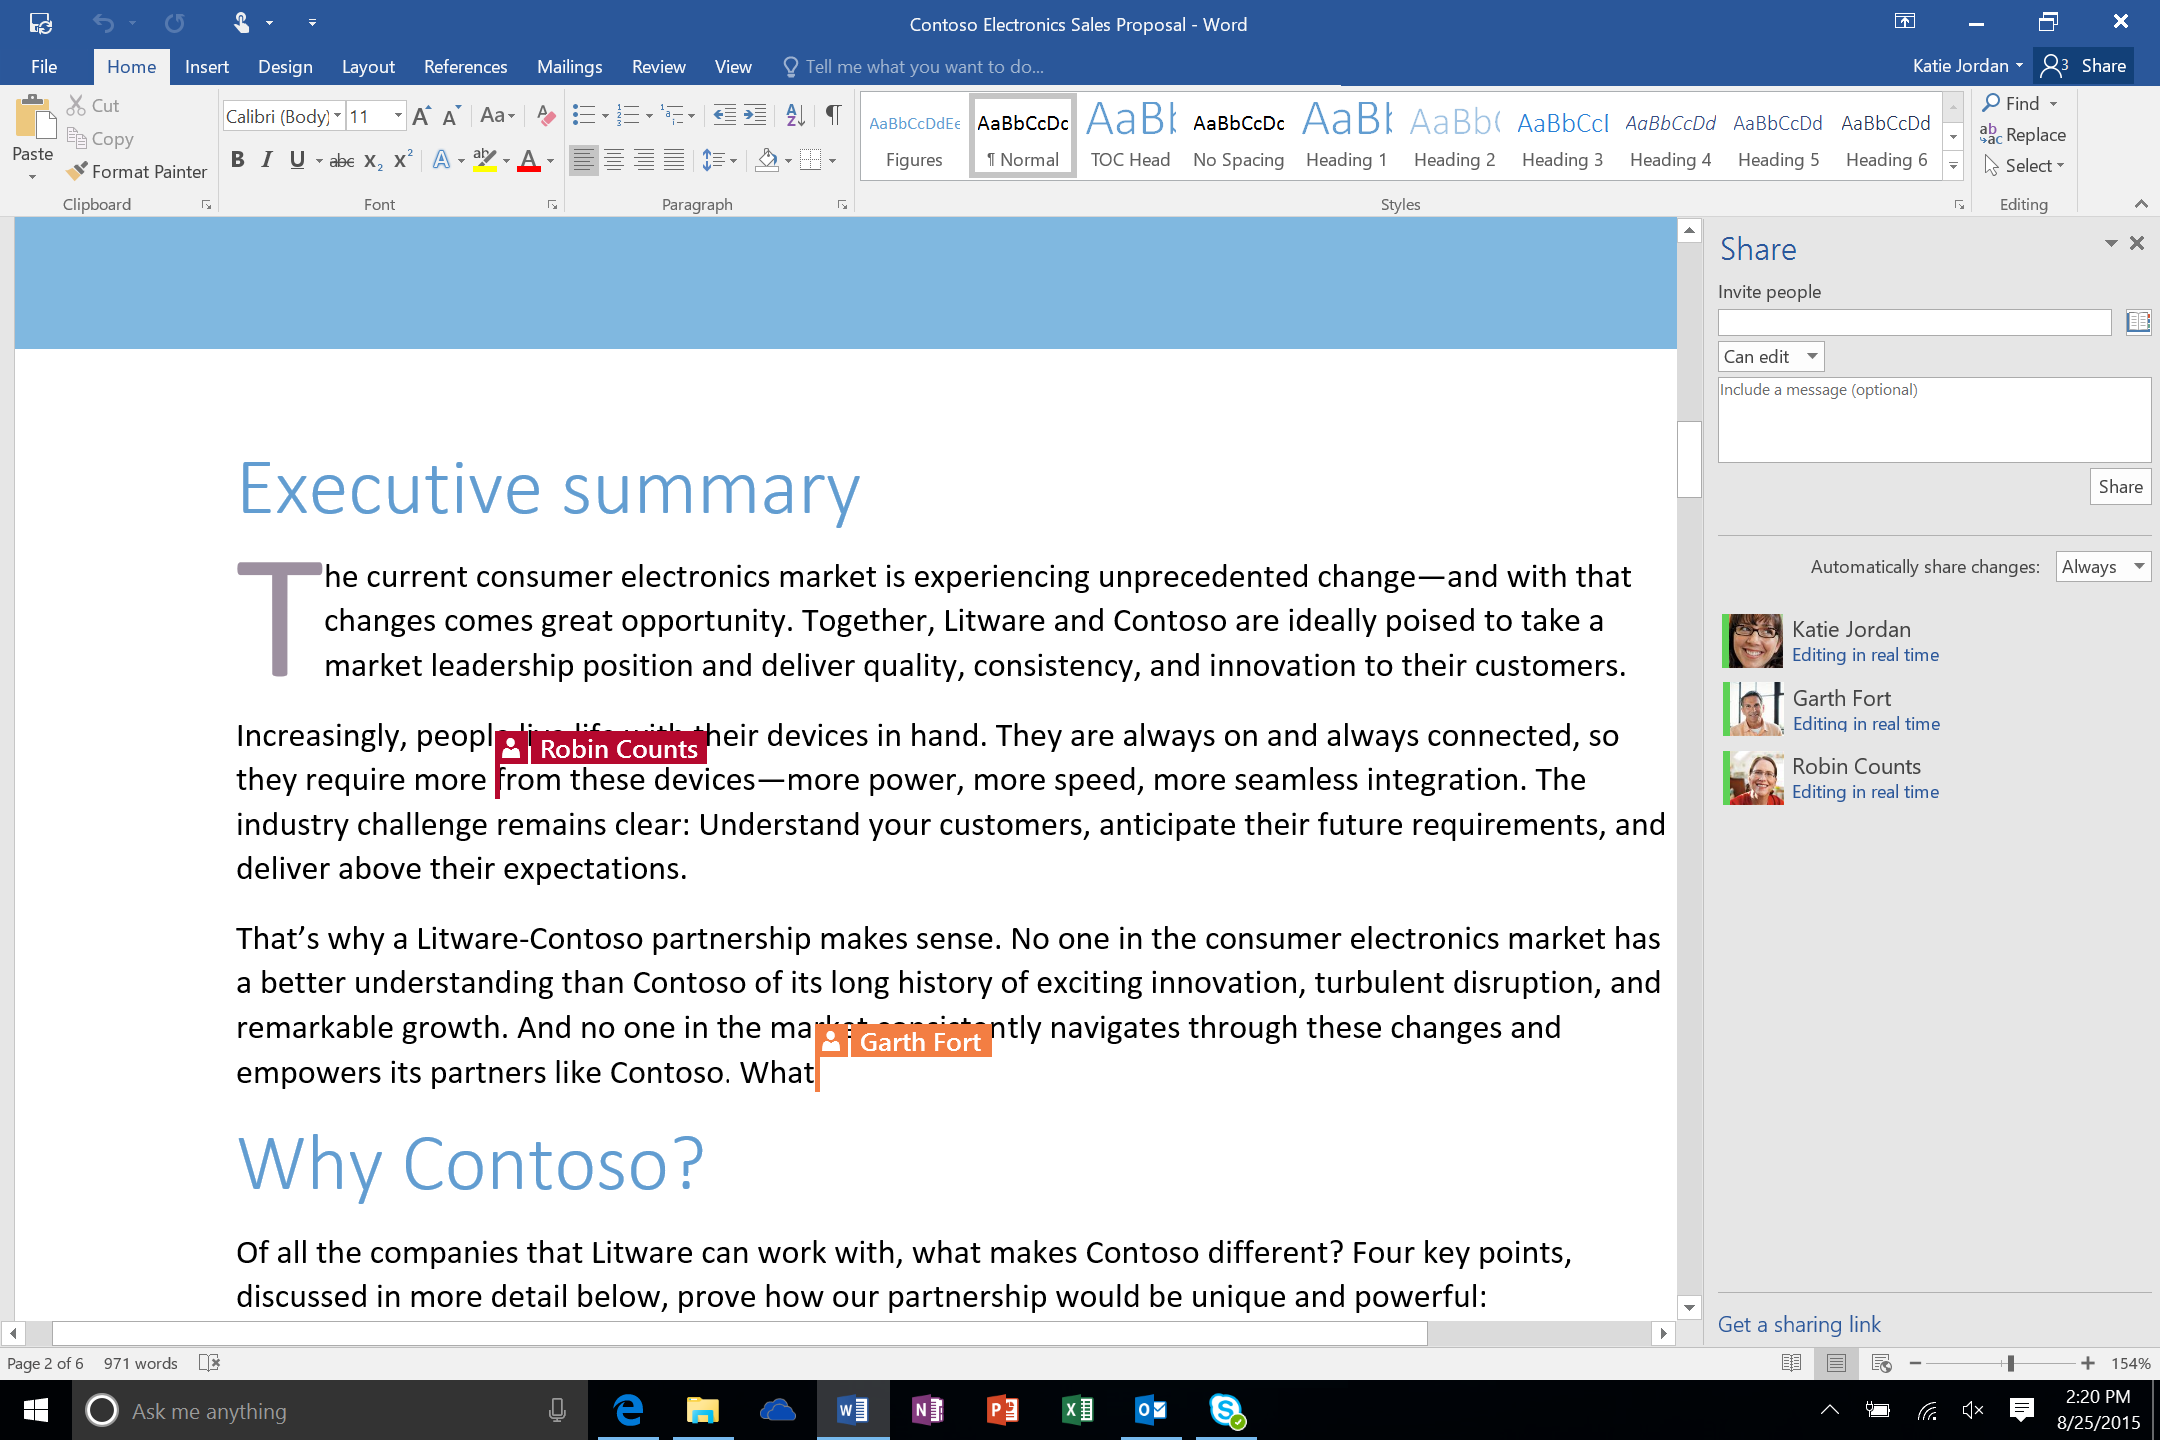 Real-time co-authoring in Word 2016